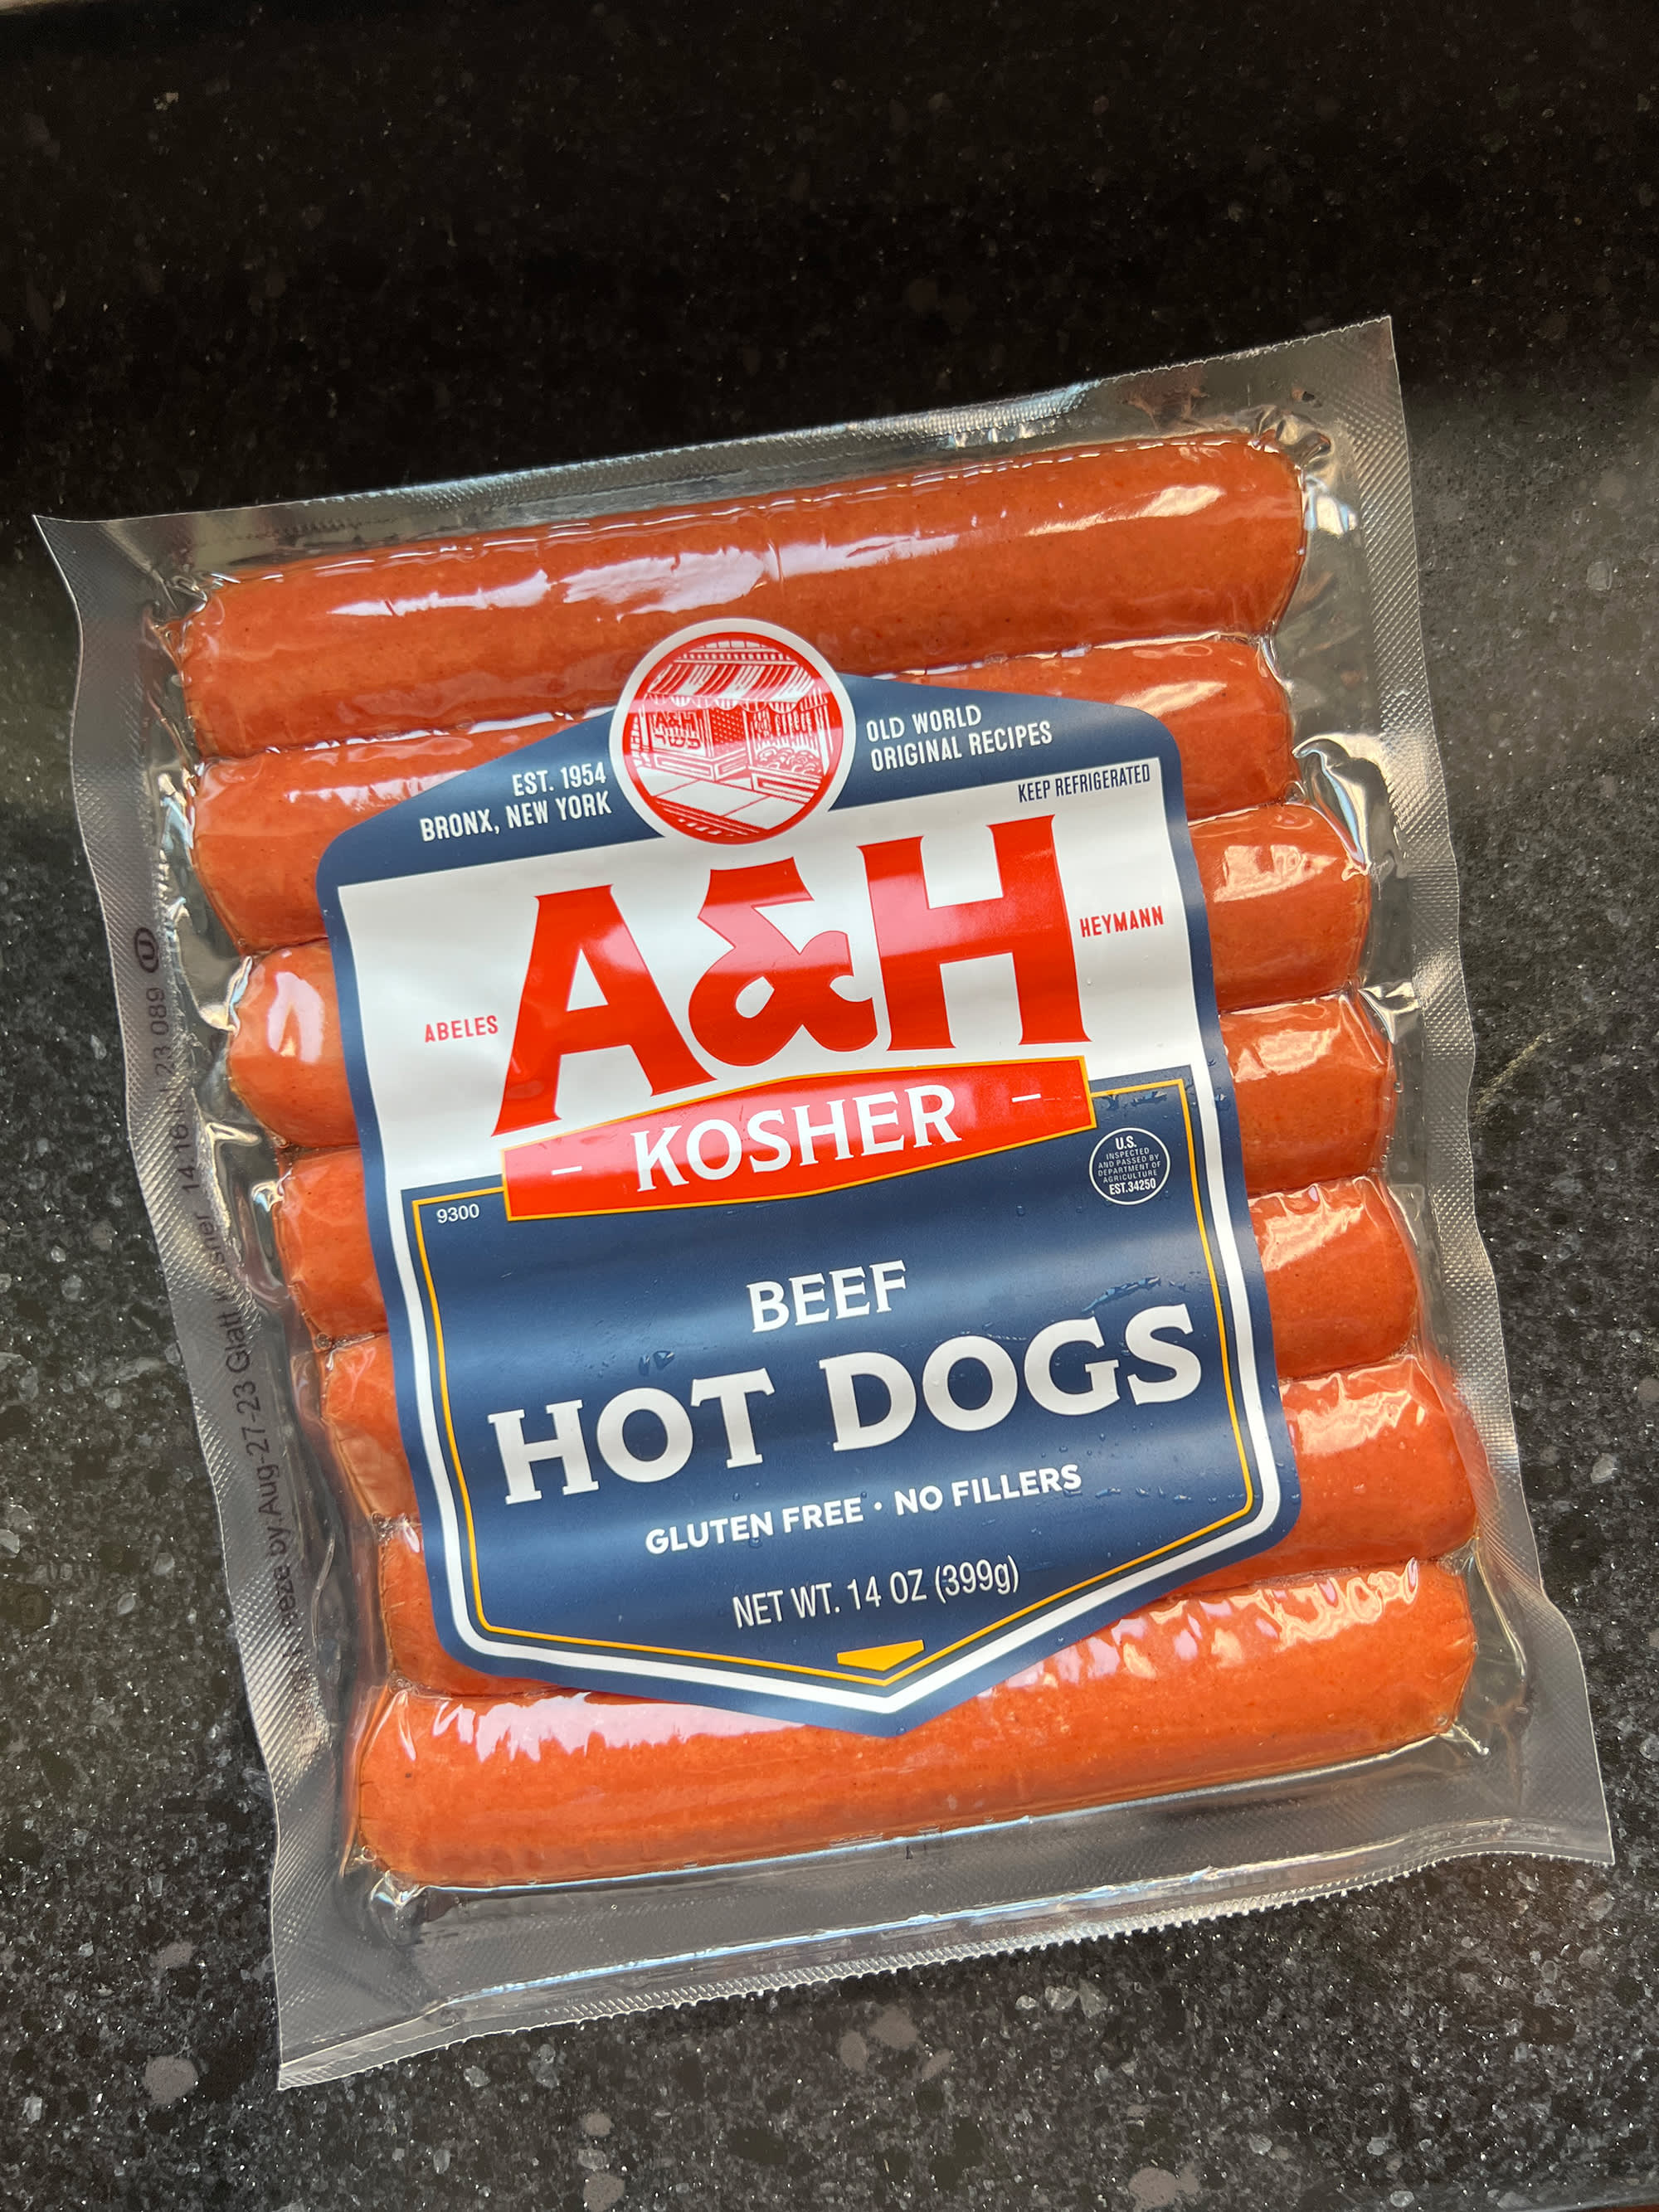 https://cdn.apartmenttherapy.info/image/upload/v1686855799/k/Edit/2023-06-a-h-kosher-beef-hot-dogs-review/a-h-kosher-beef-hot-dogs-review-7163.jpg